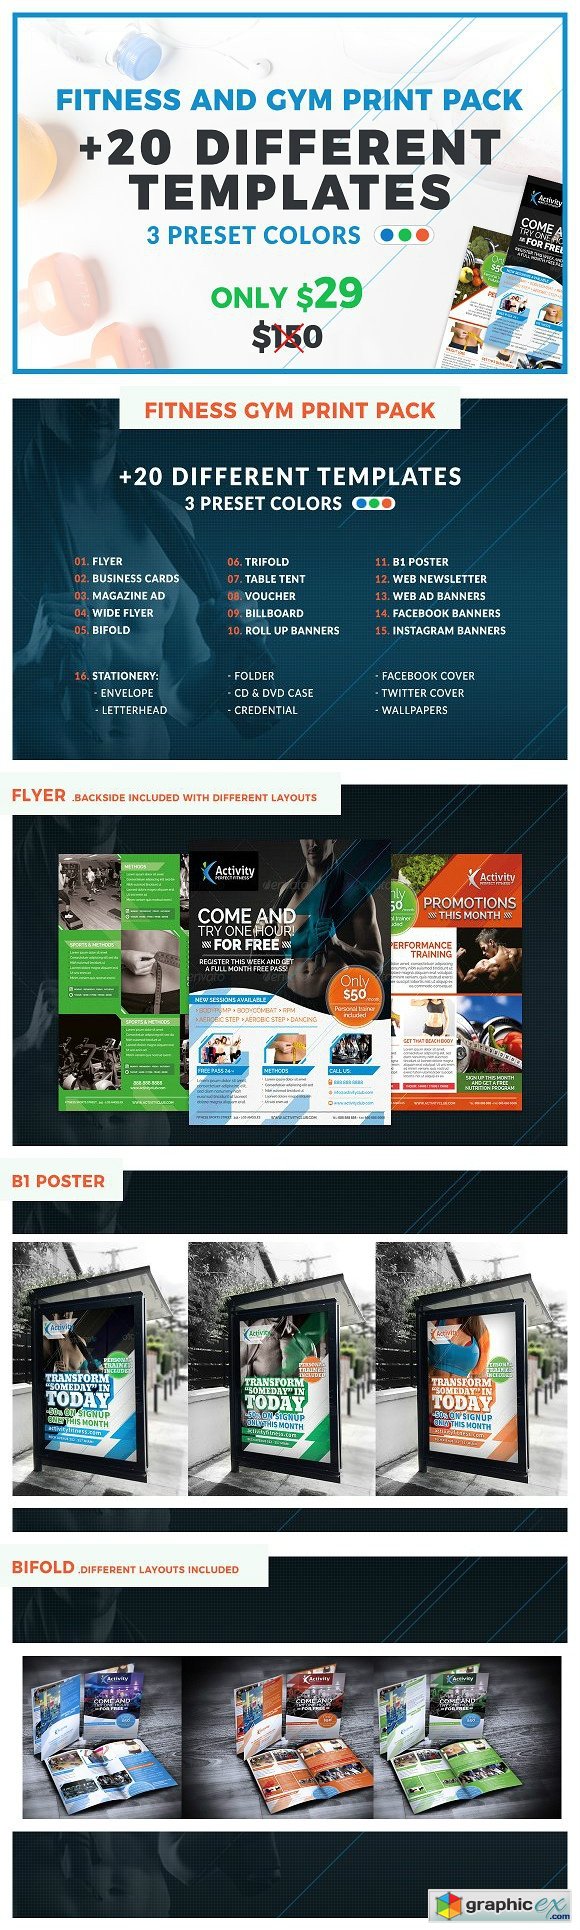 Fitness Gym Business Print Pack